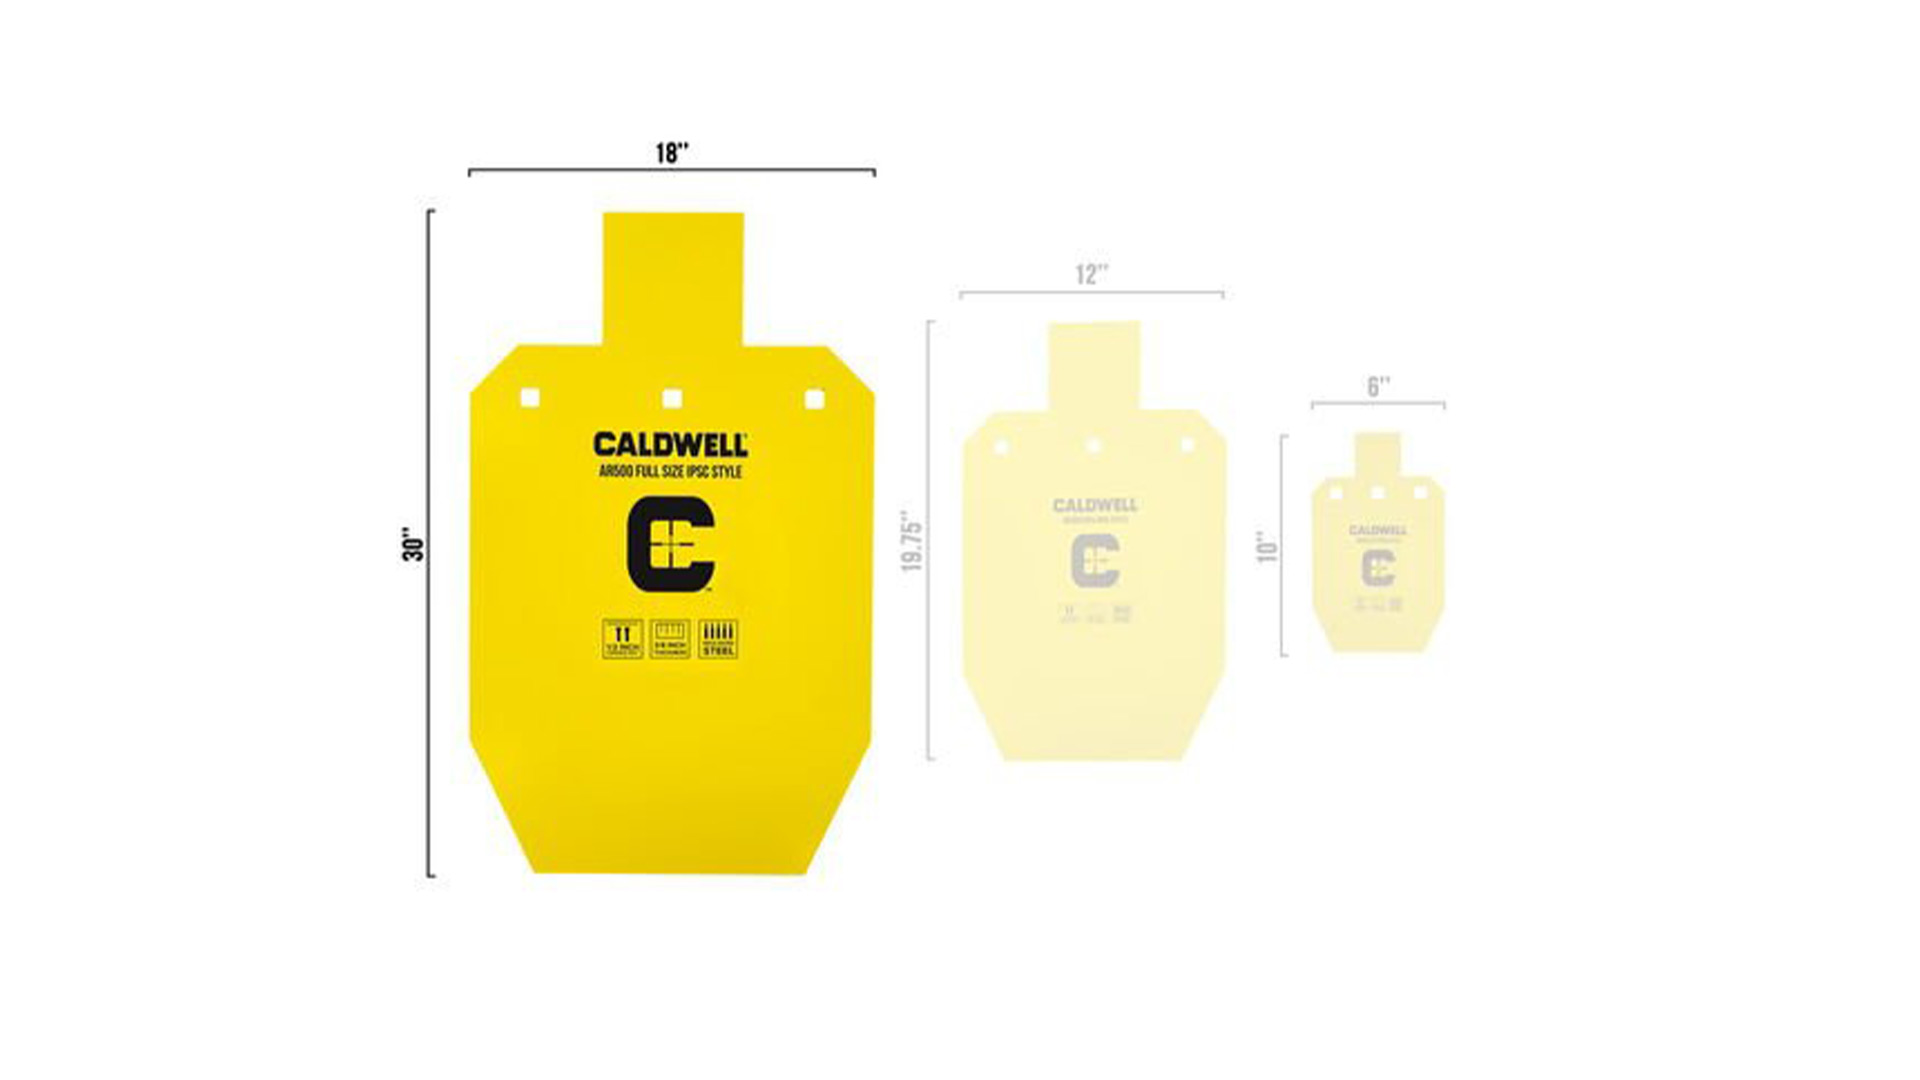 Caldwell IPSC-style steel target sizes